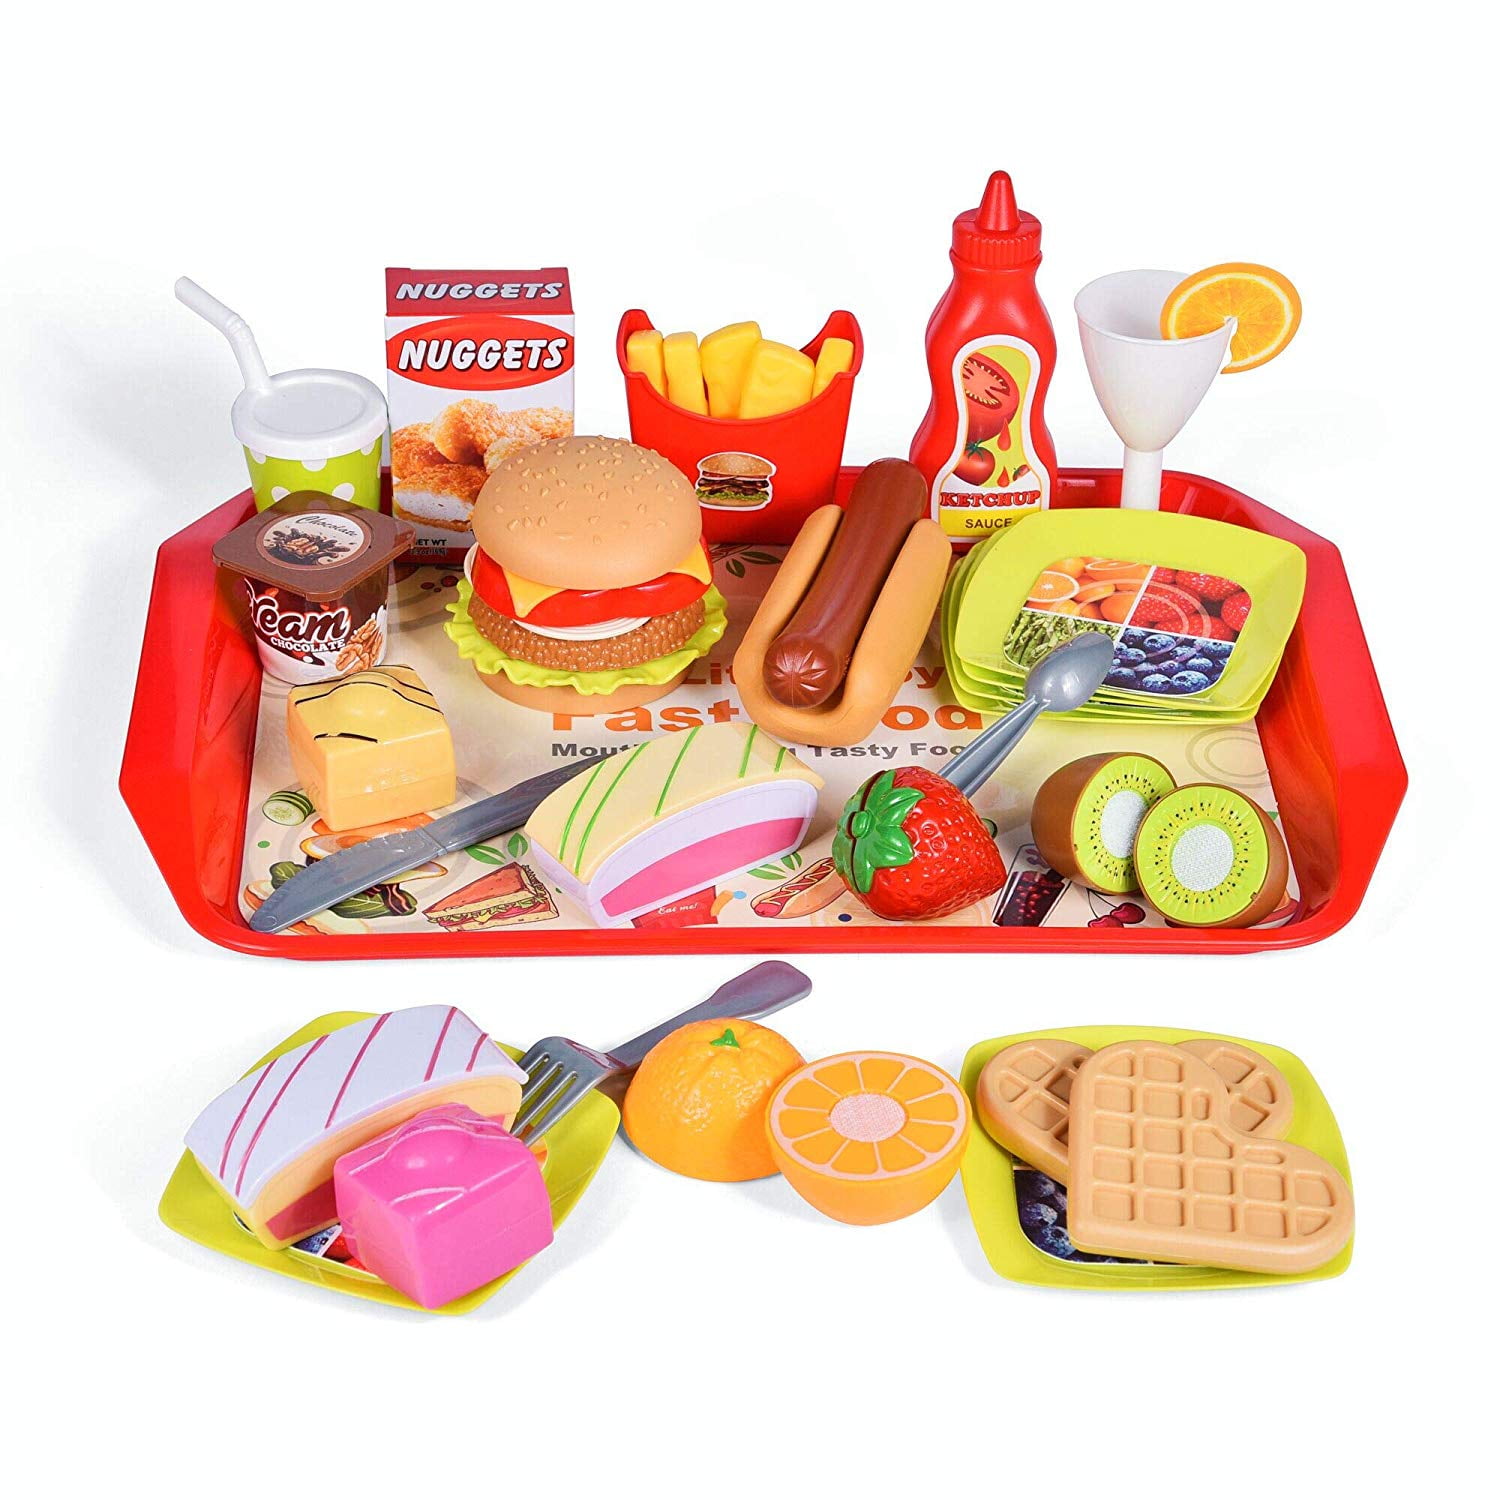 Kids Pretend Kitchen Play Set Toy Food Cooking Toddler Toys Gift Playset Gifts 